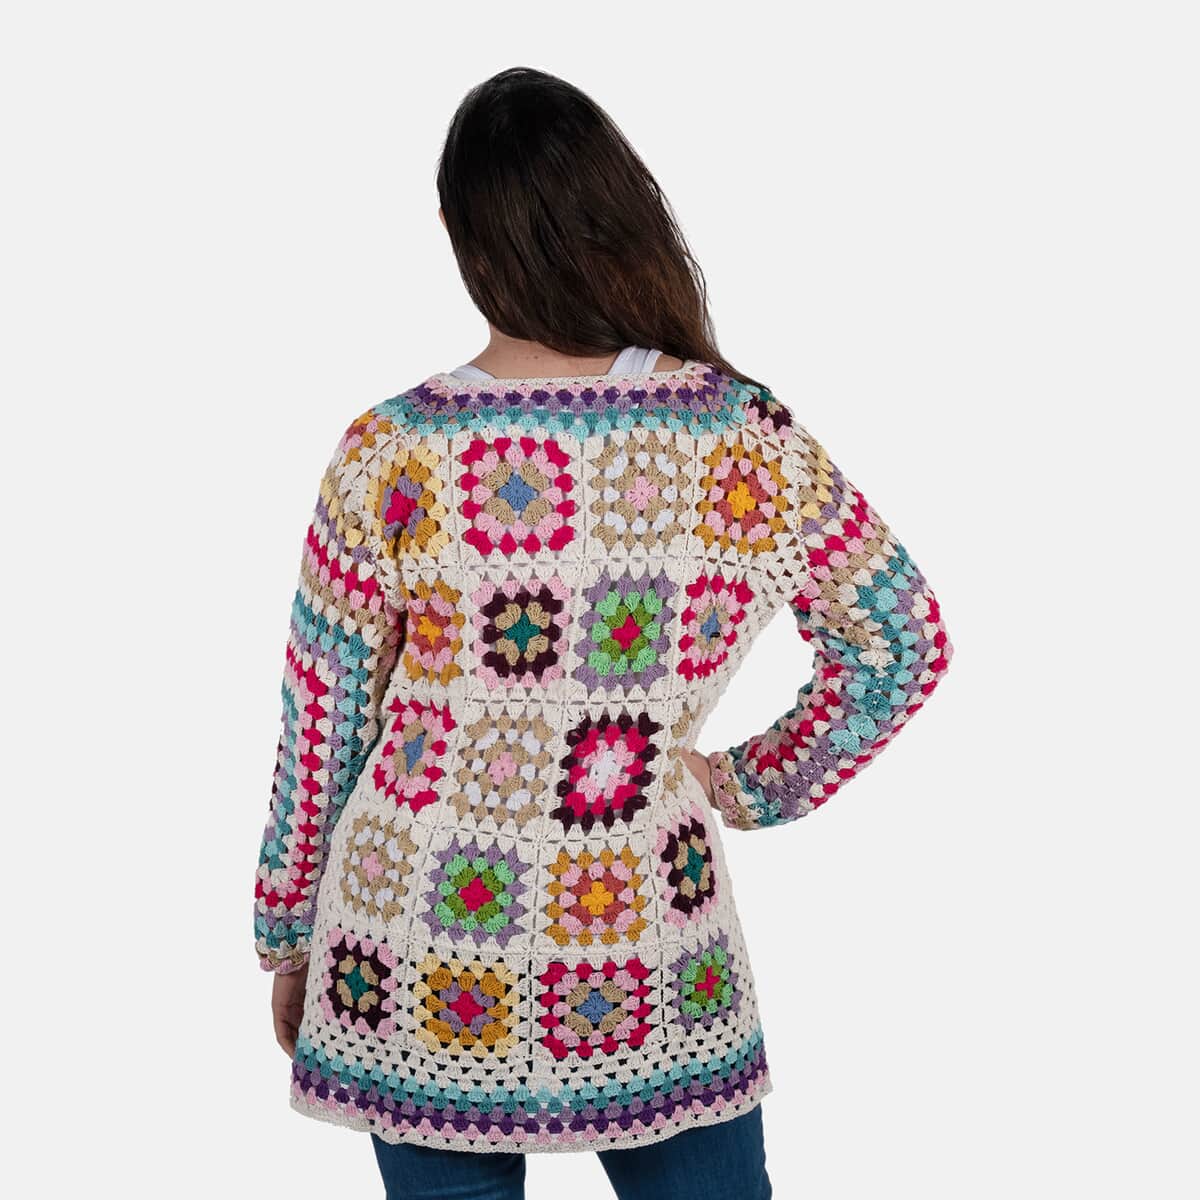 Passage 100% Cotton Crochet White and Multicolor Square Cardigan- (3X) image number 1